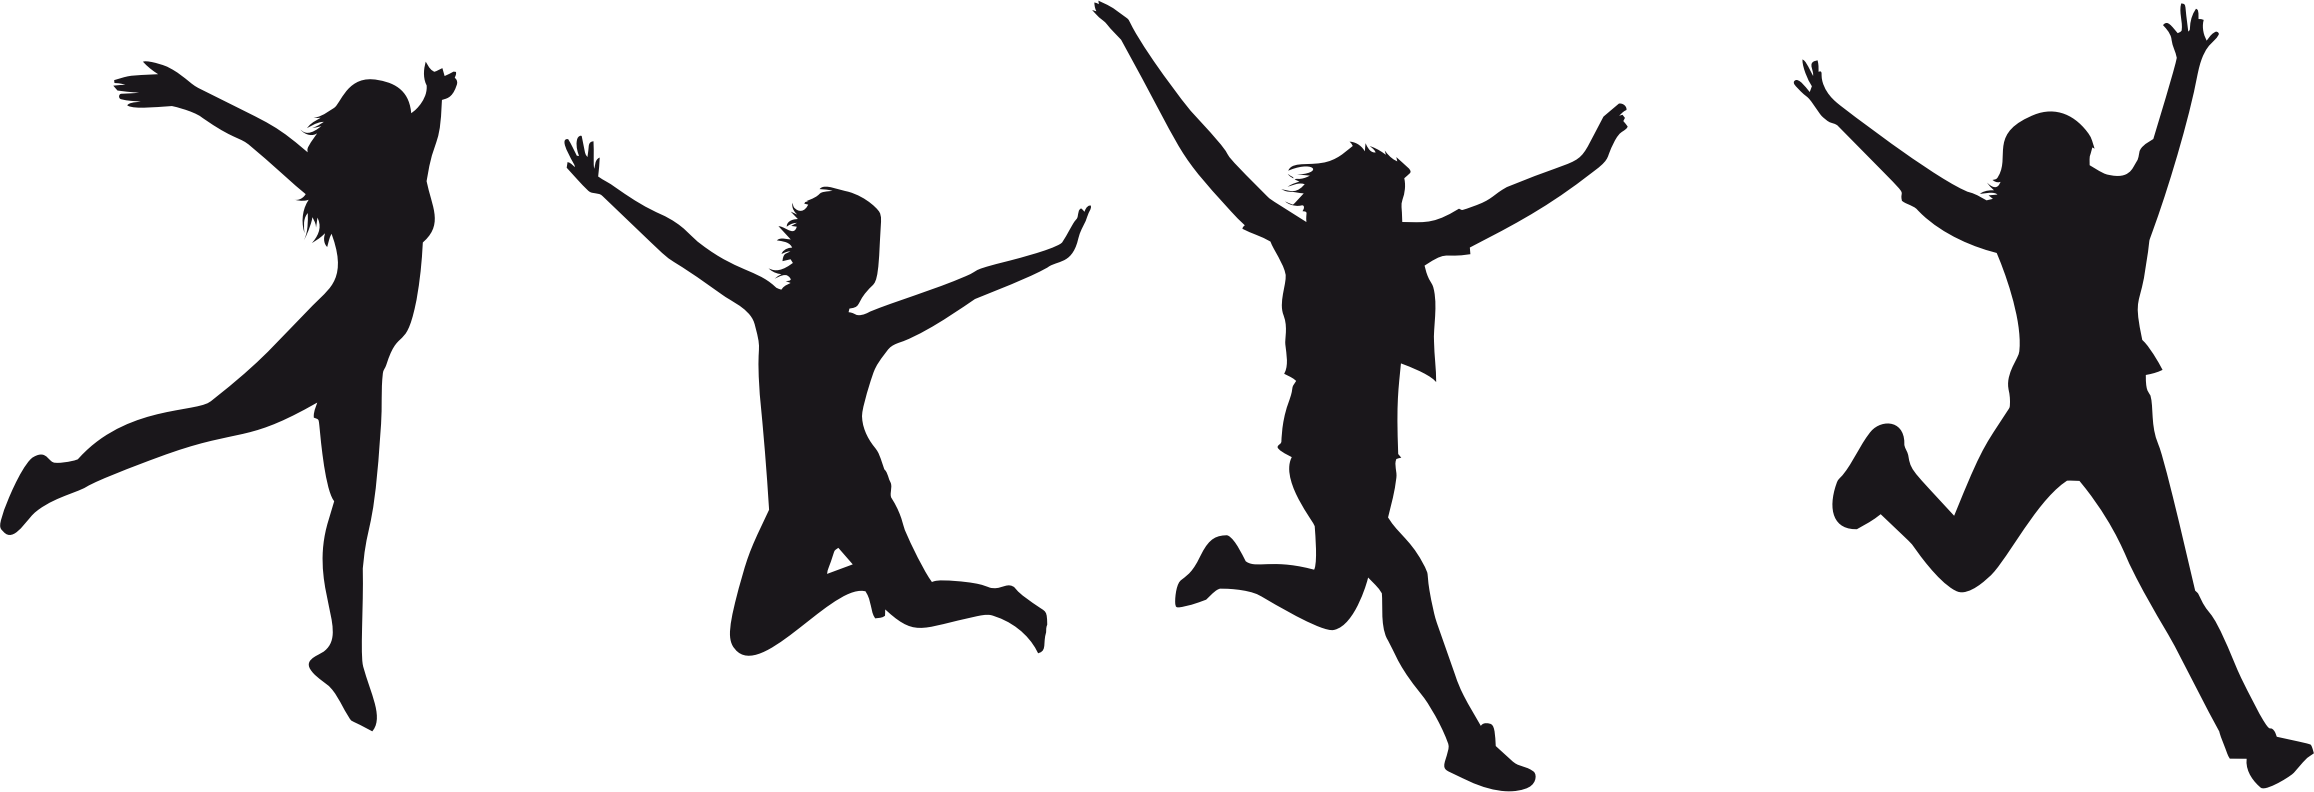 Joy Jumping Silhouette 2 - Silhouette Of People Jumping (2314x792)